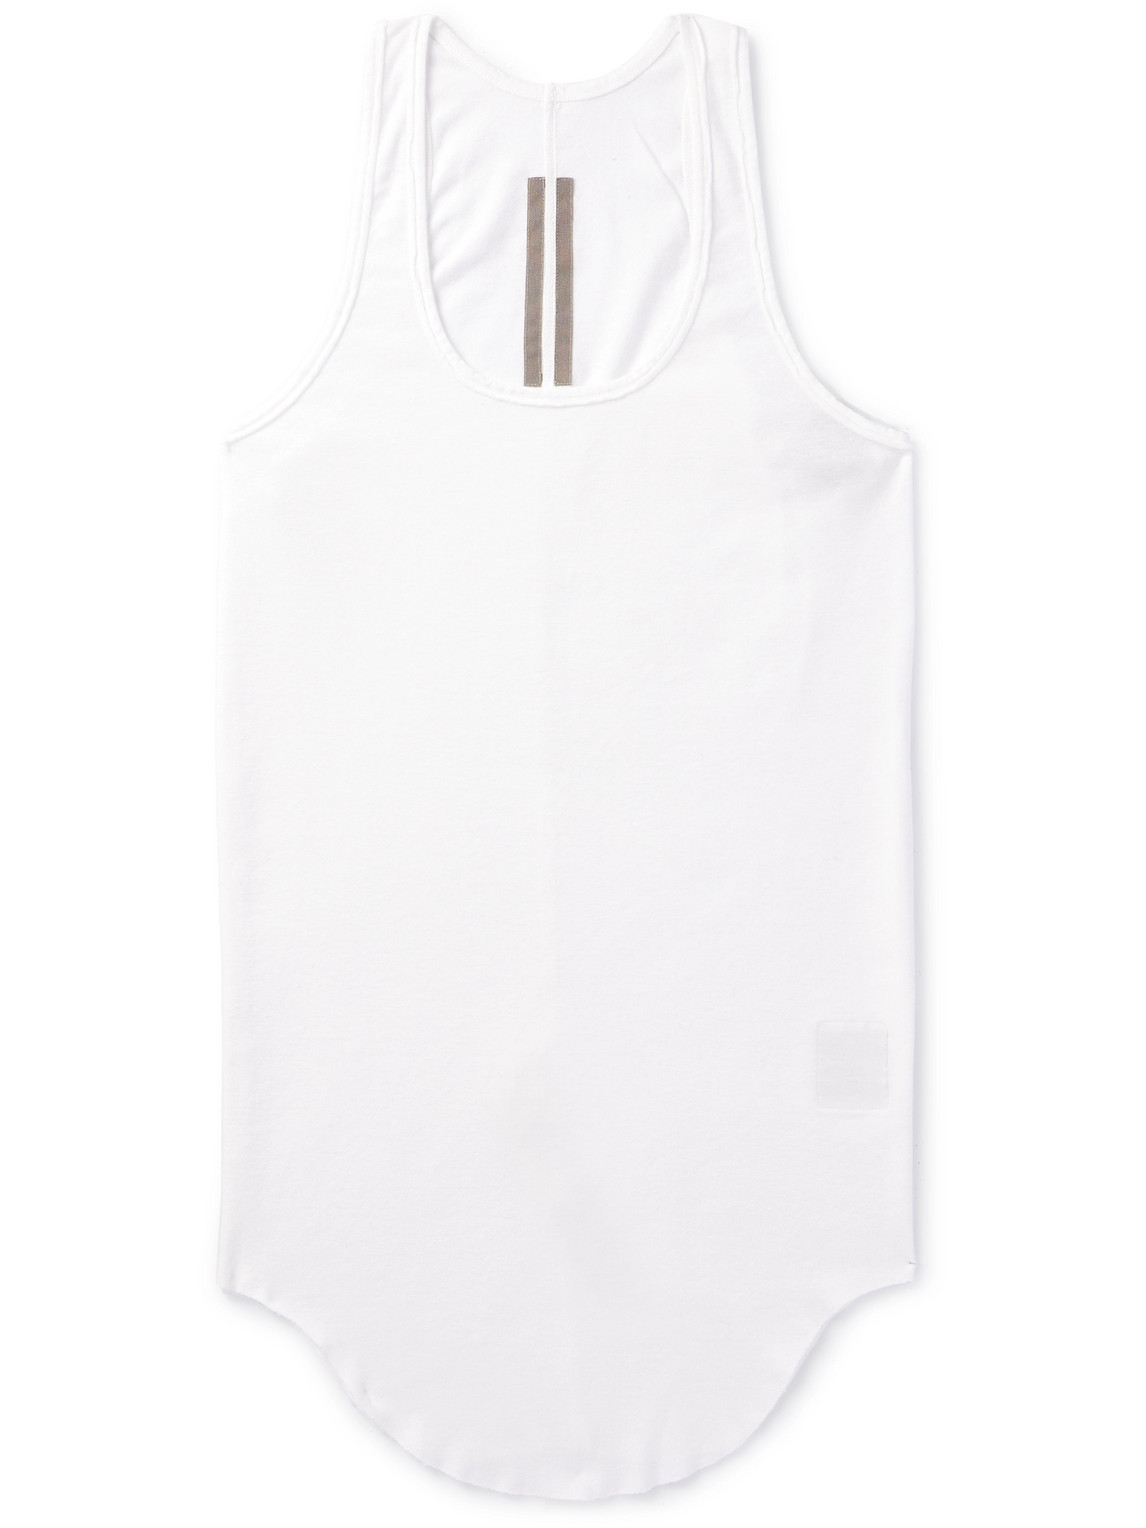 DRKSHDW By Rick Owens - Cotton-Jersey Tank Top - Men - White - M von DRKSHDW By Rick Owens